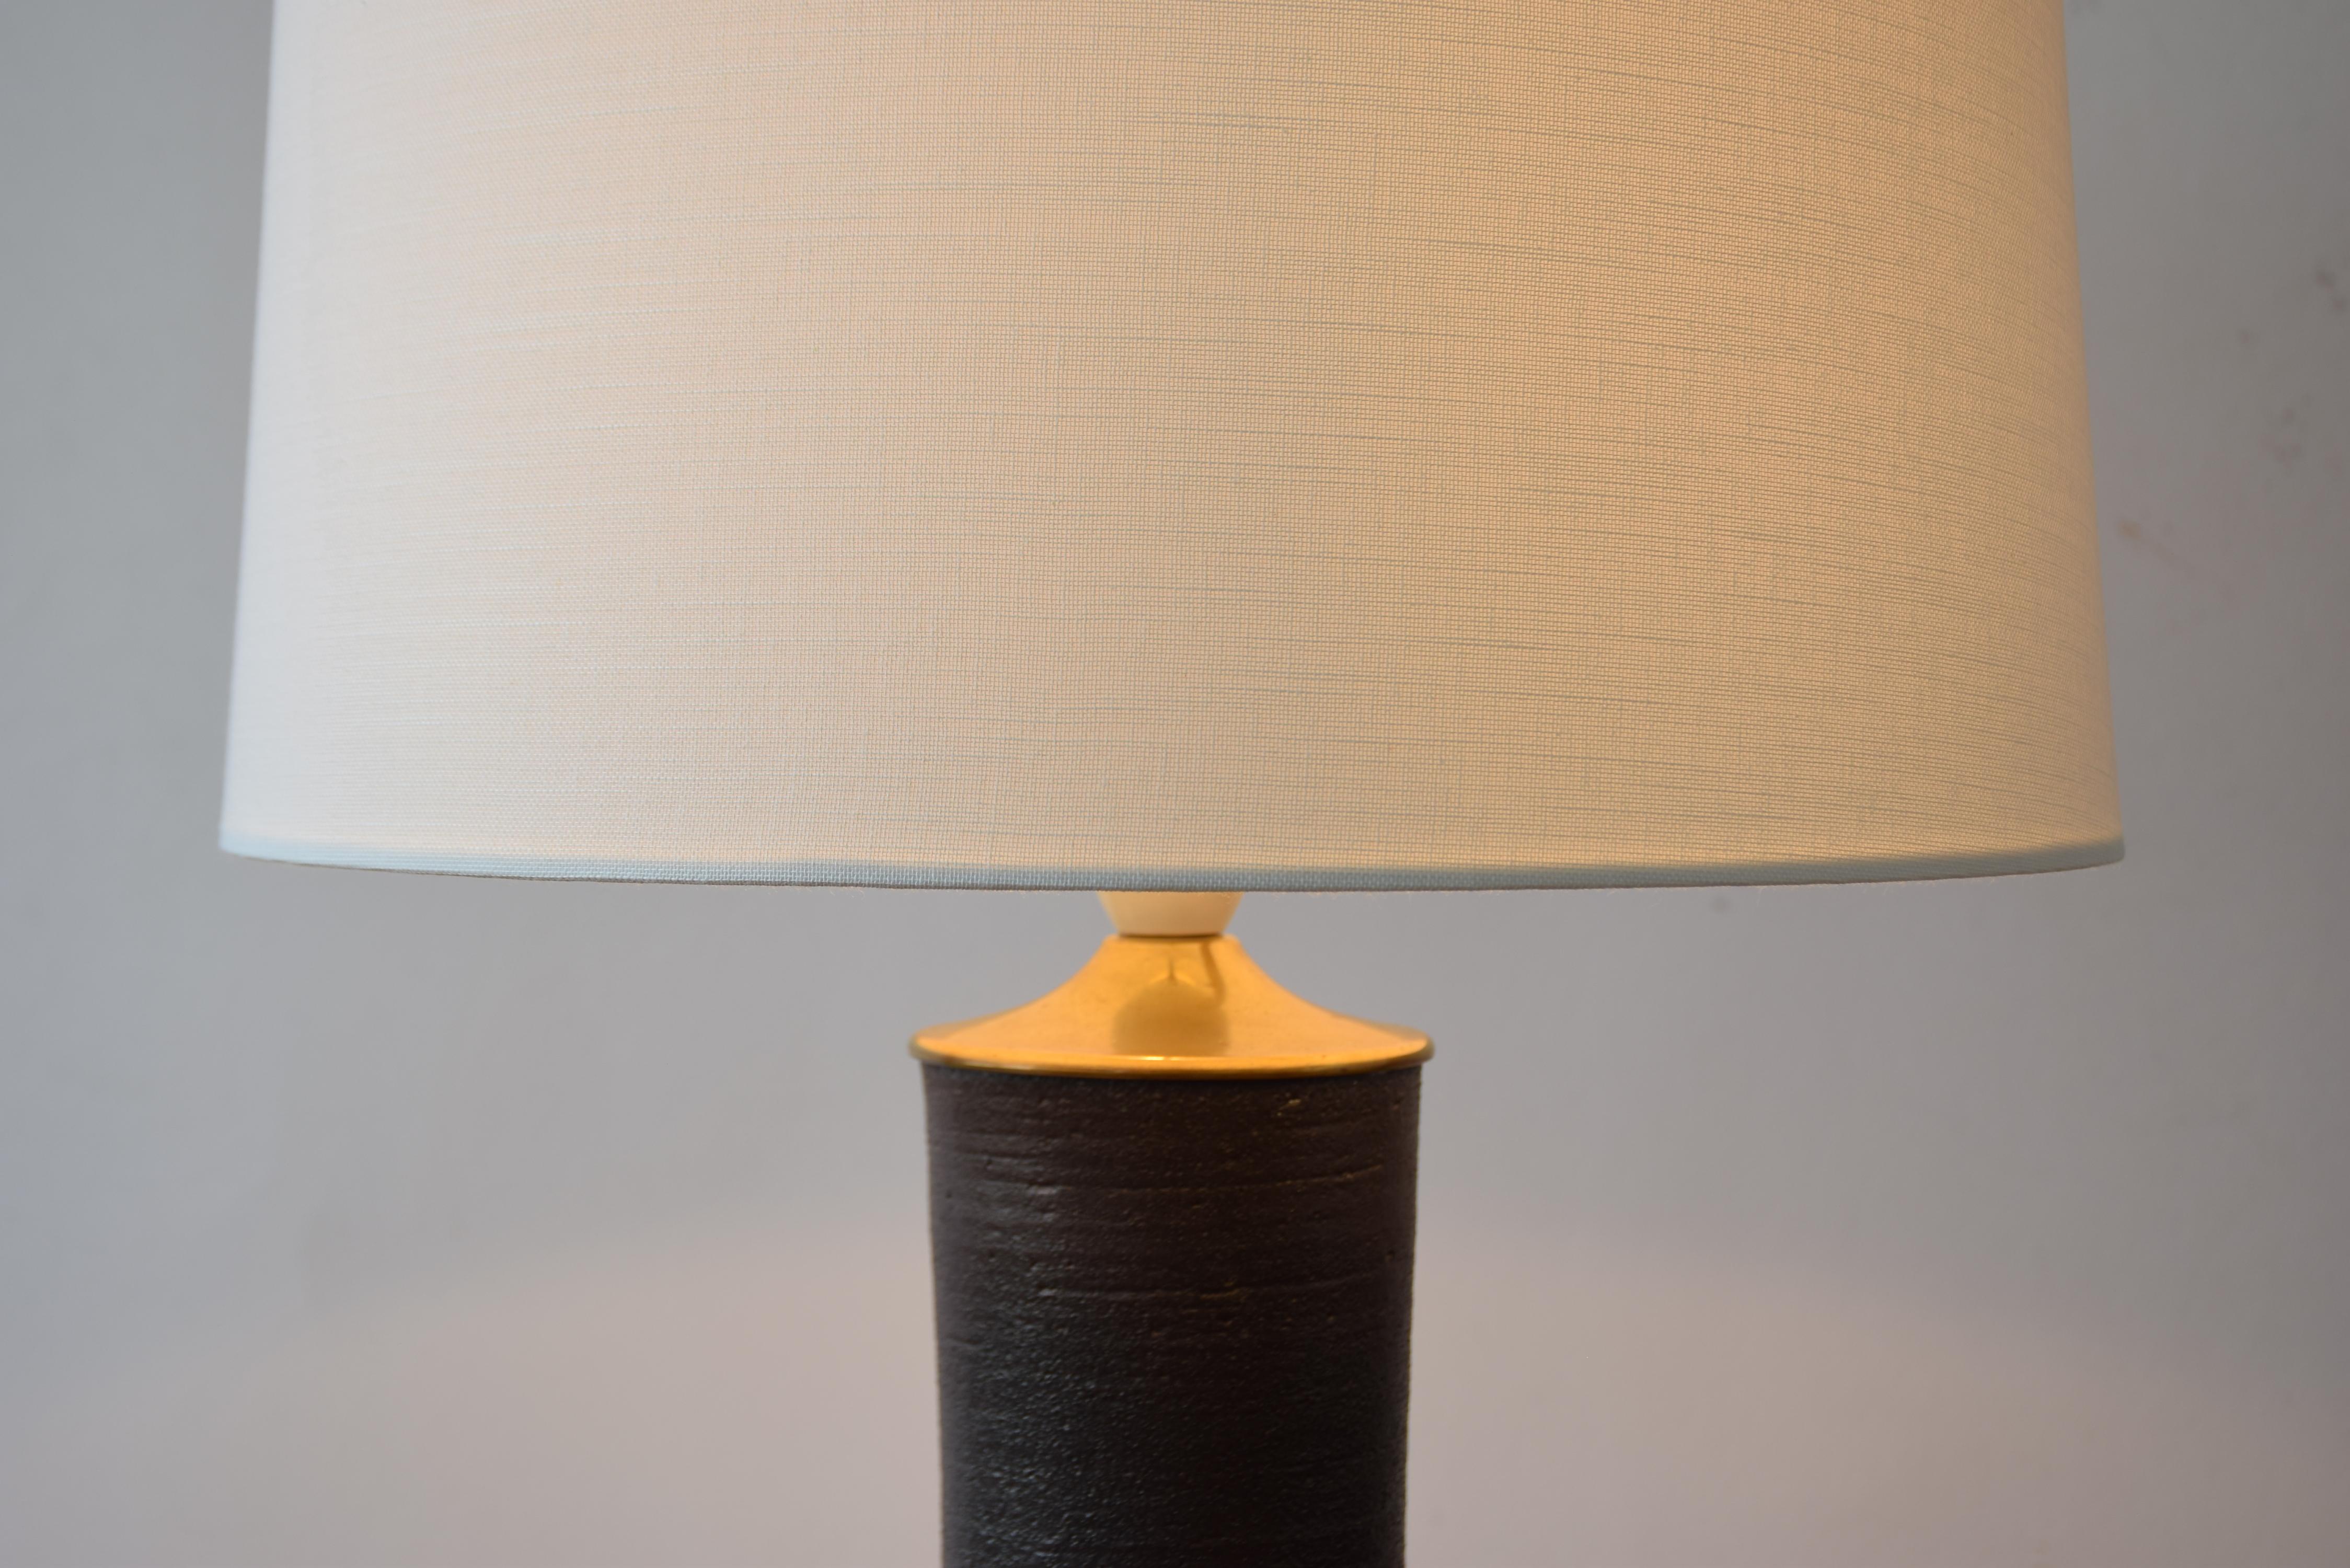 Midcentury Arabia Finland Tall Table Lamp Brown with Brass, Liisa Hallamaa 1960s For Sale 6